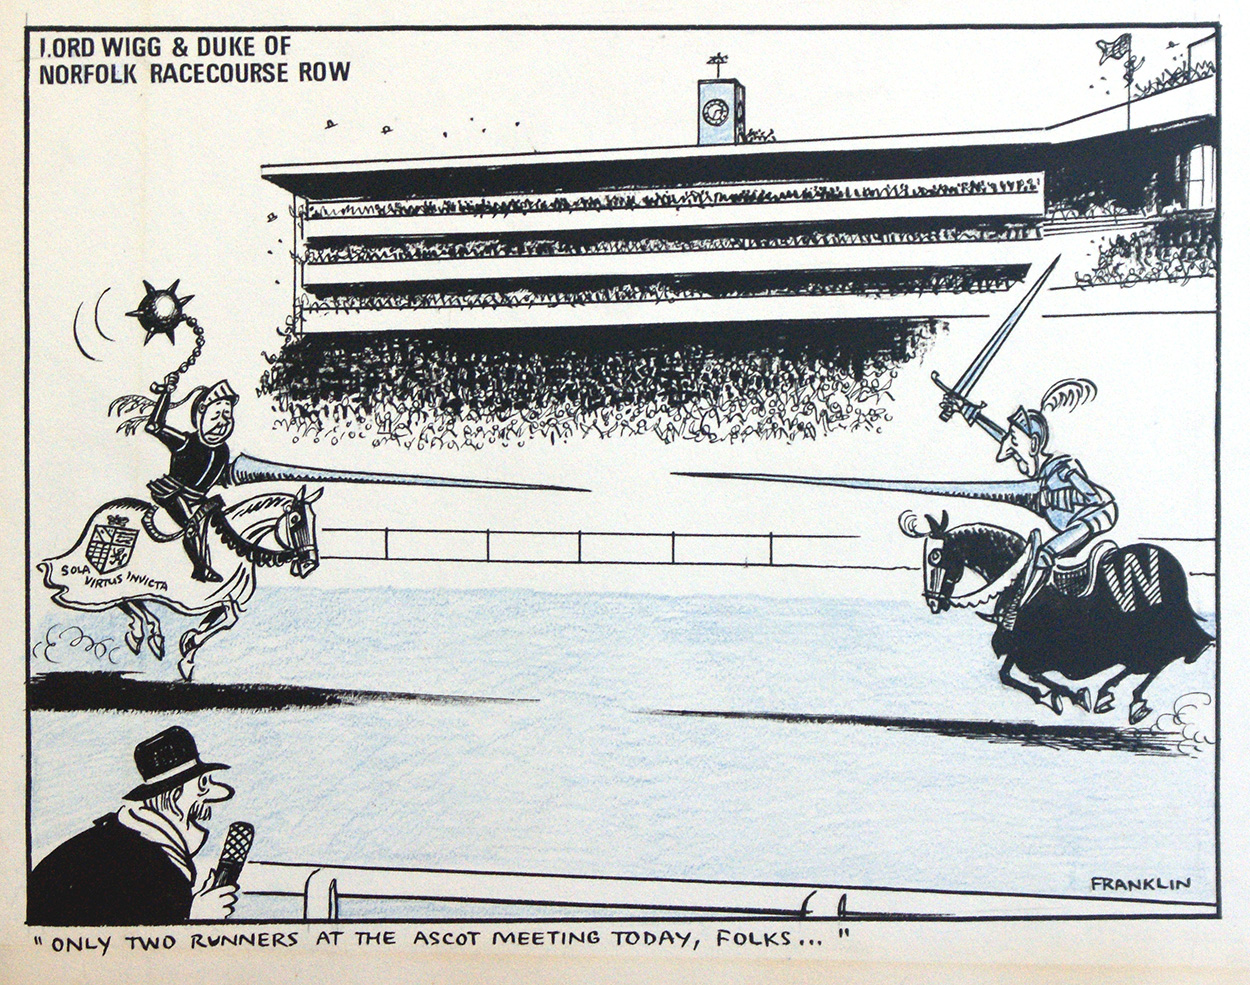 Ascot Joust Jest (Original) (Signed) art by Stanley Arthur Franklin at The Illustration Art Gallery